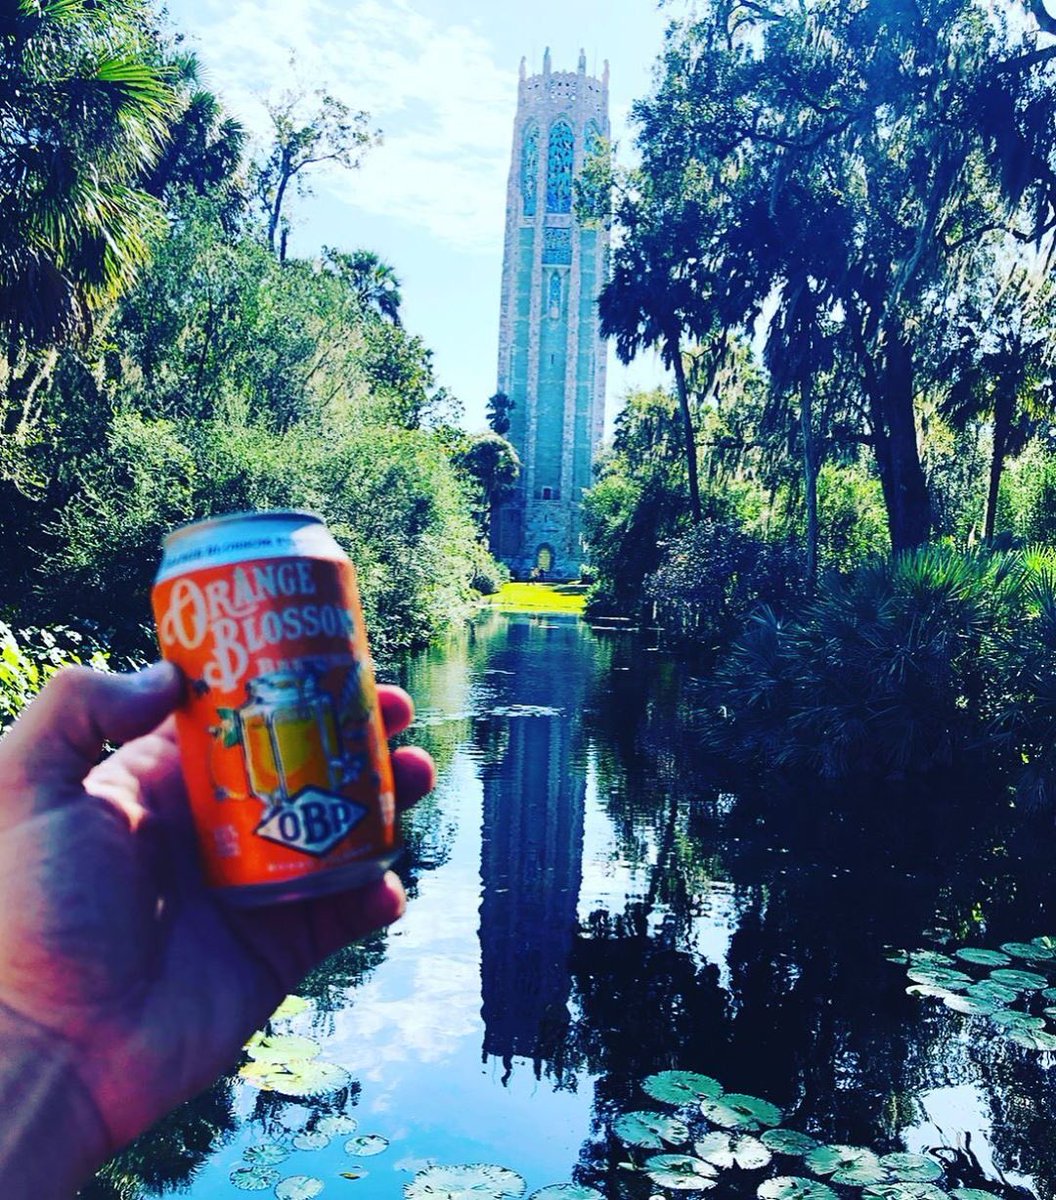 Cheers to the weekend! Let’s get out there. 😁👍🍻
.
Repost IG: @tyler898 #boktowergardens #orangeblossombrewing 🍊🎄🍻